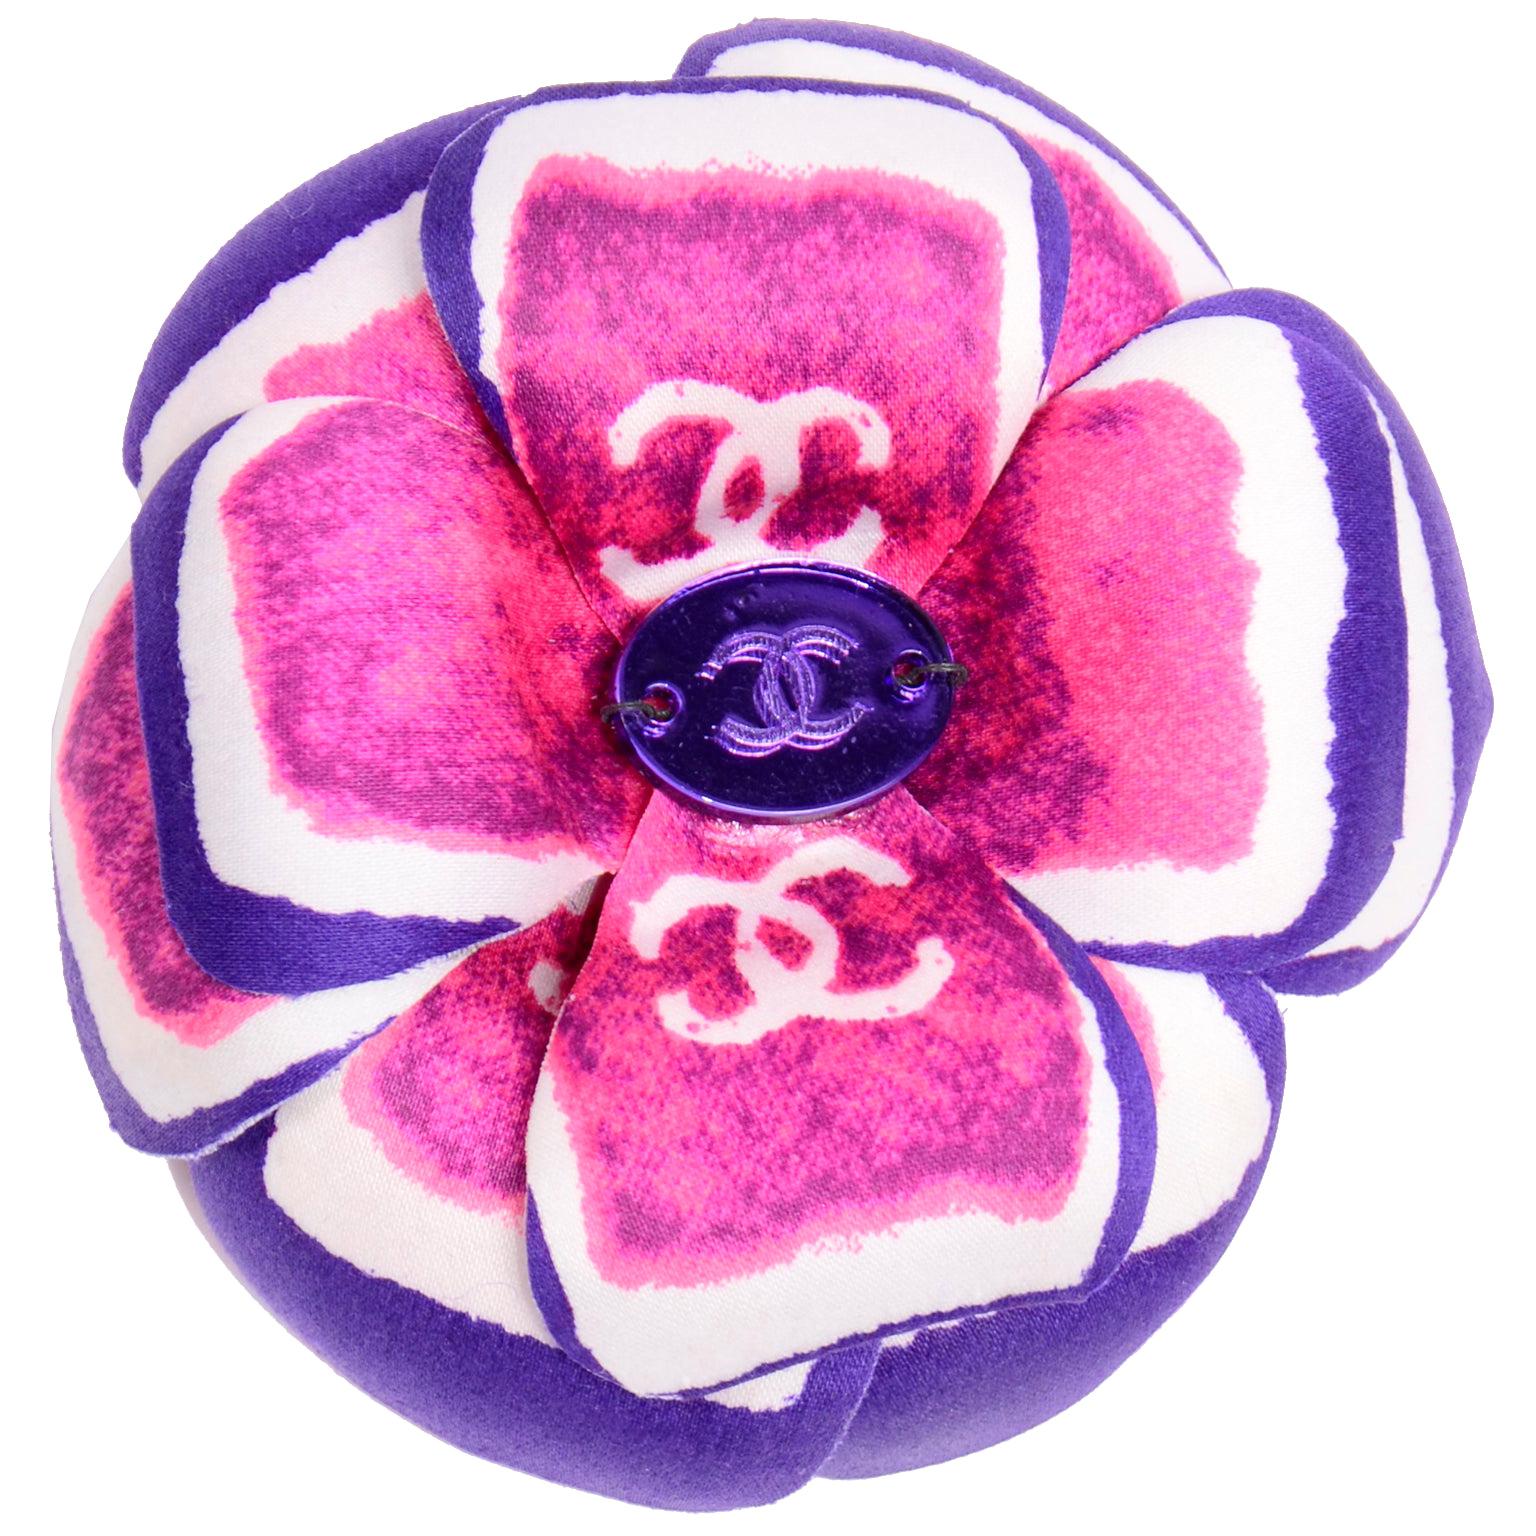 Chanel Spring 2001 Violet and Pink Camellia Flower Brooch W Tags & Original Box